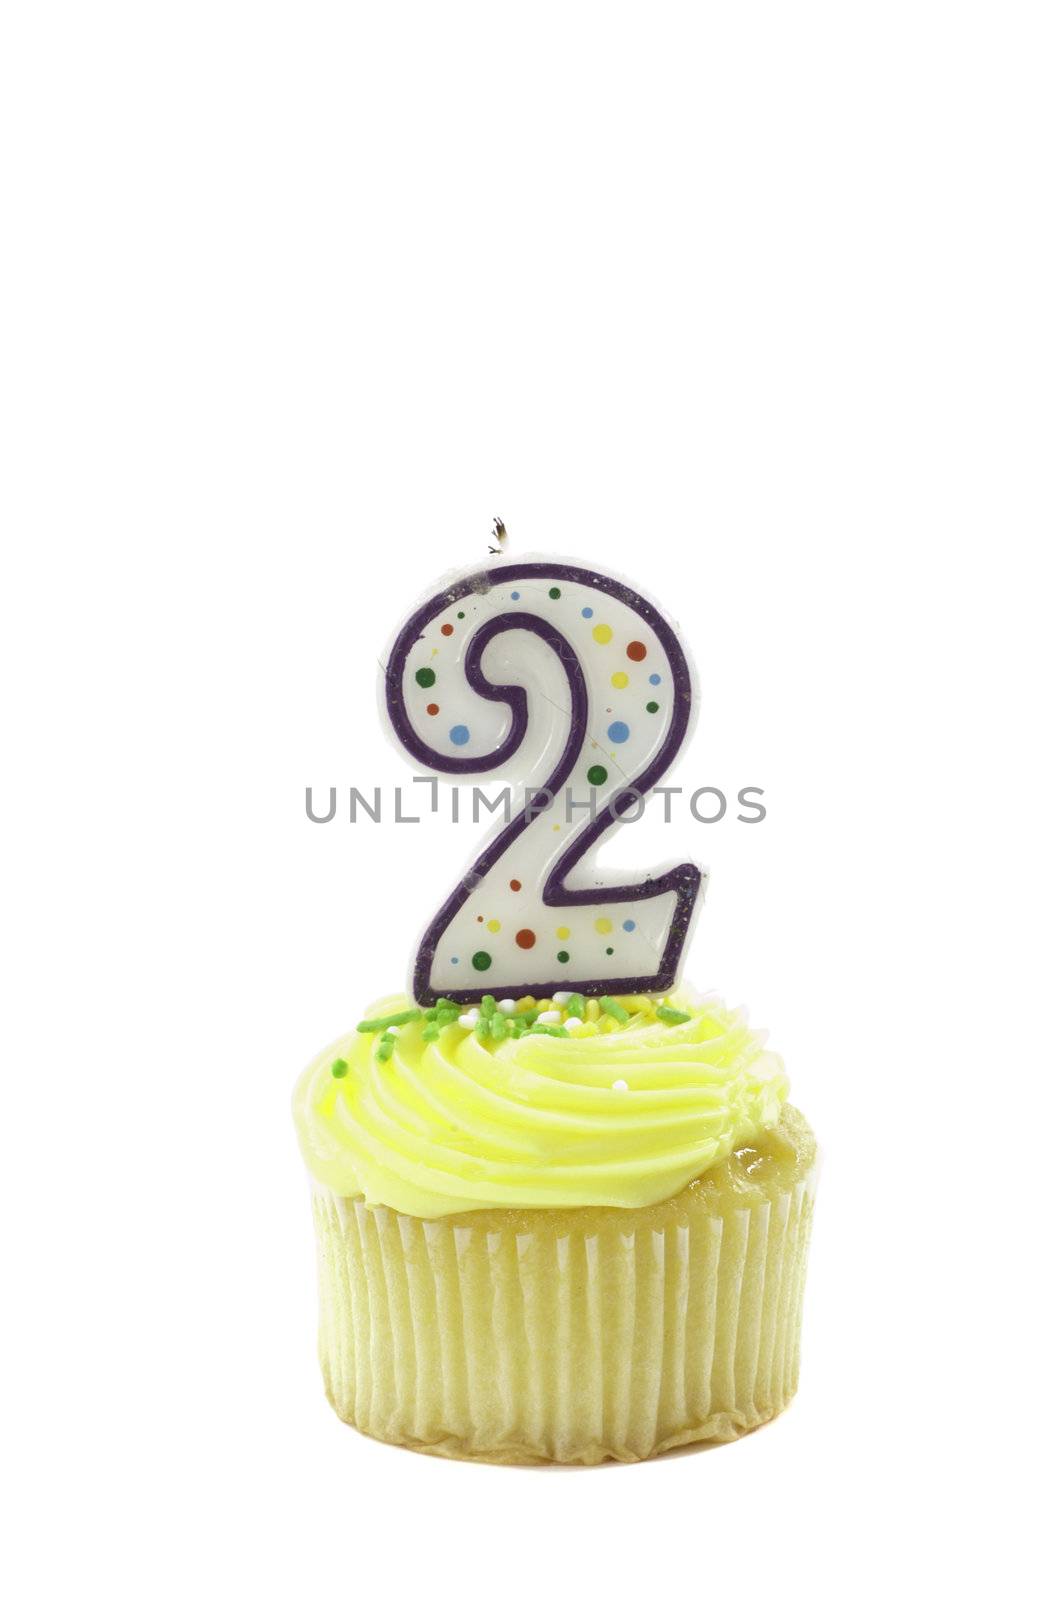 cupcake, isolated on white with a decorative candle in the shape of a number two